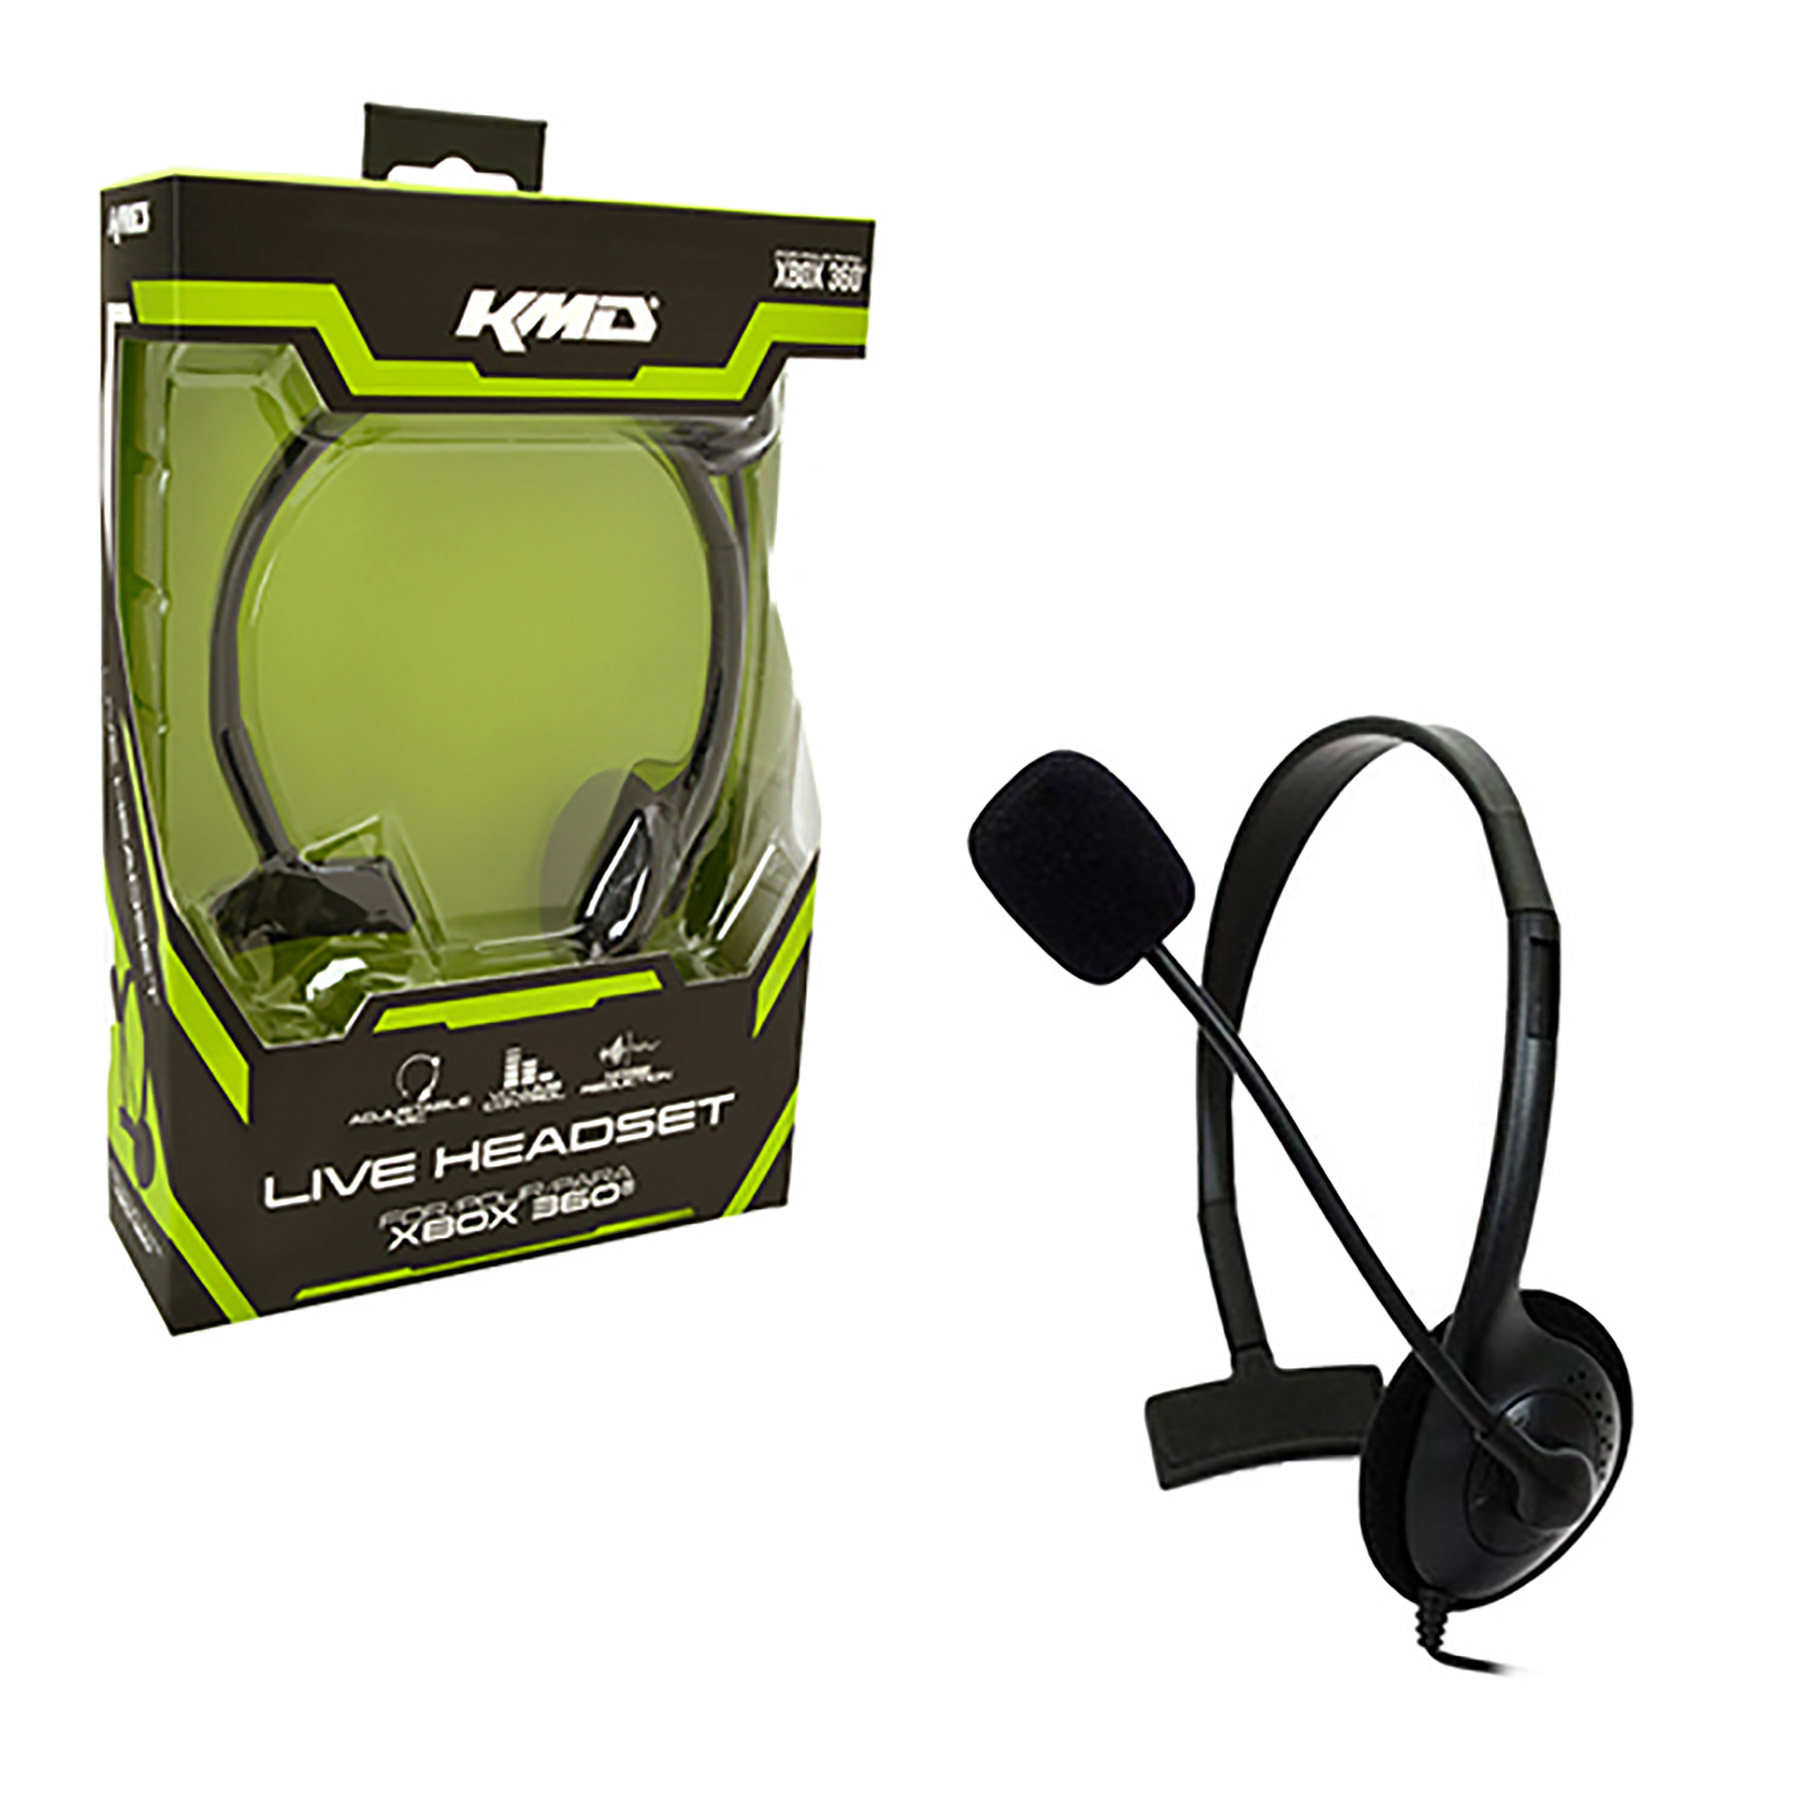 xbox 360 headset compatible with xbox one